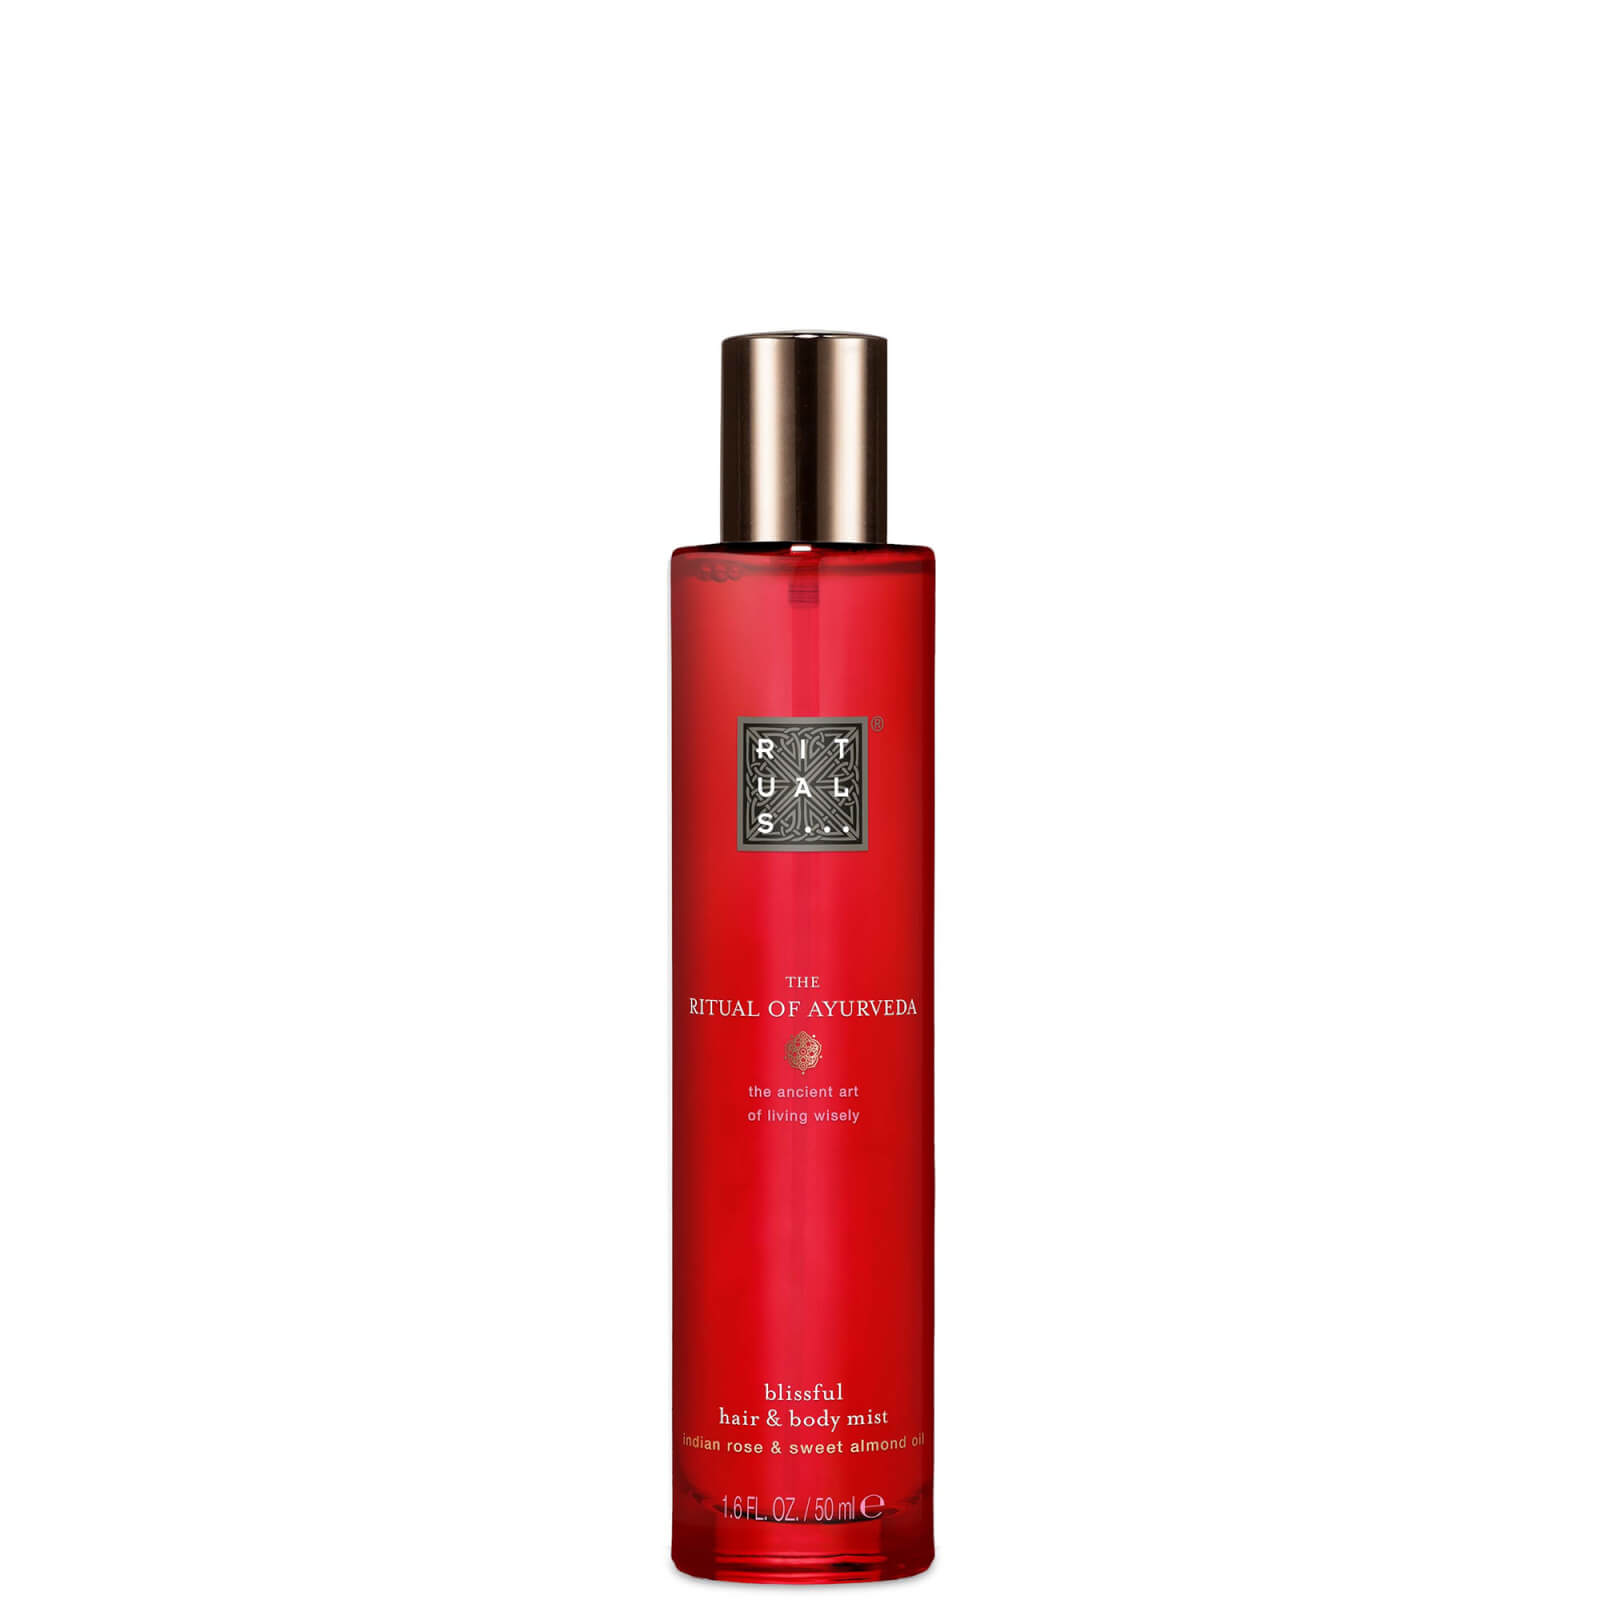 Rituals The Ritual of Ayurveda Sweet Almond & Indian Rose Hair and Body Mist 50ml